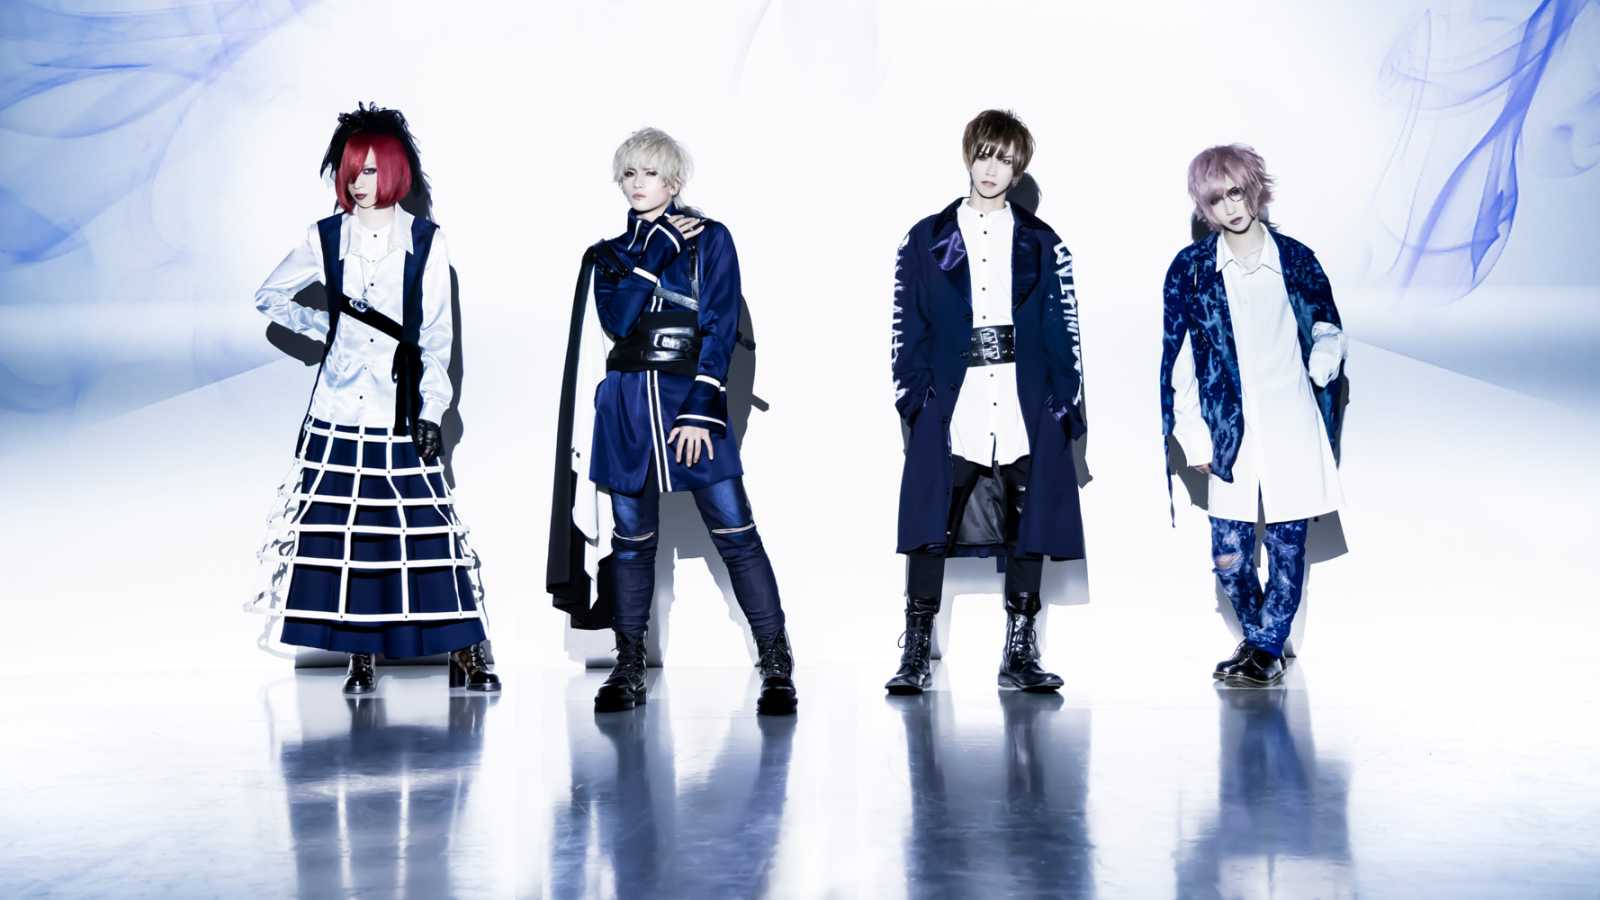 New Single from Royz © Royz. All rights reserved.